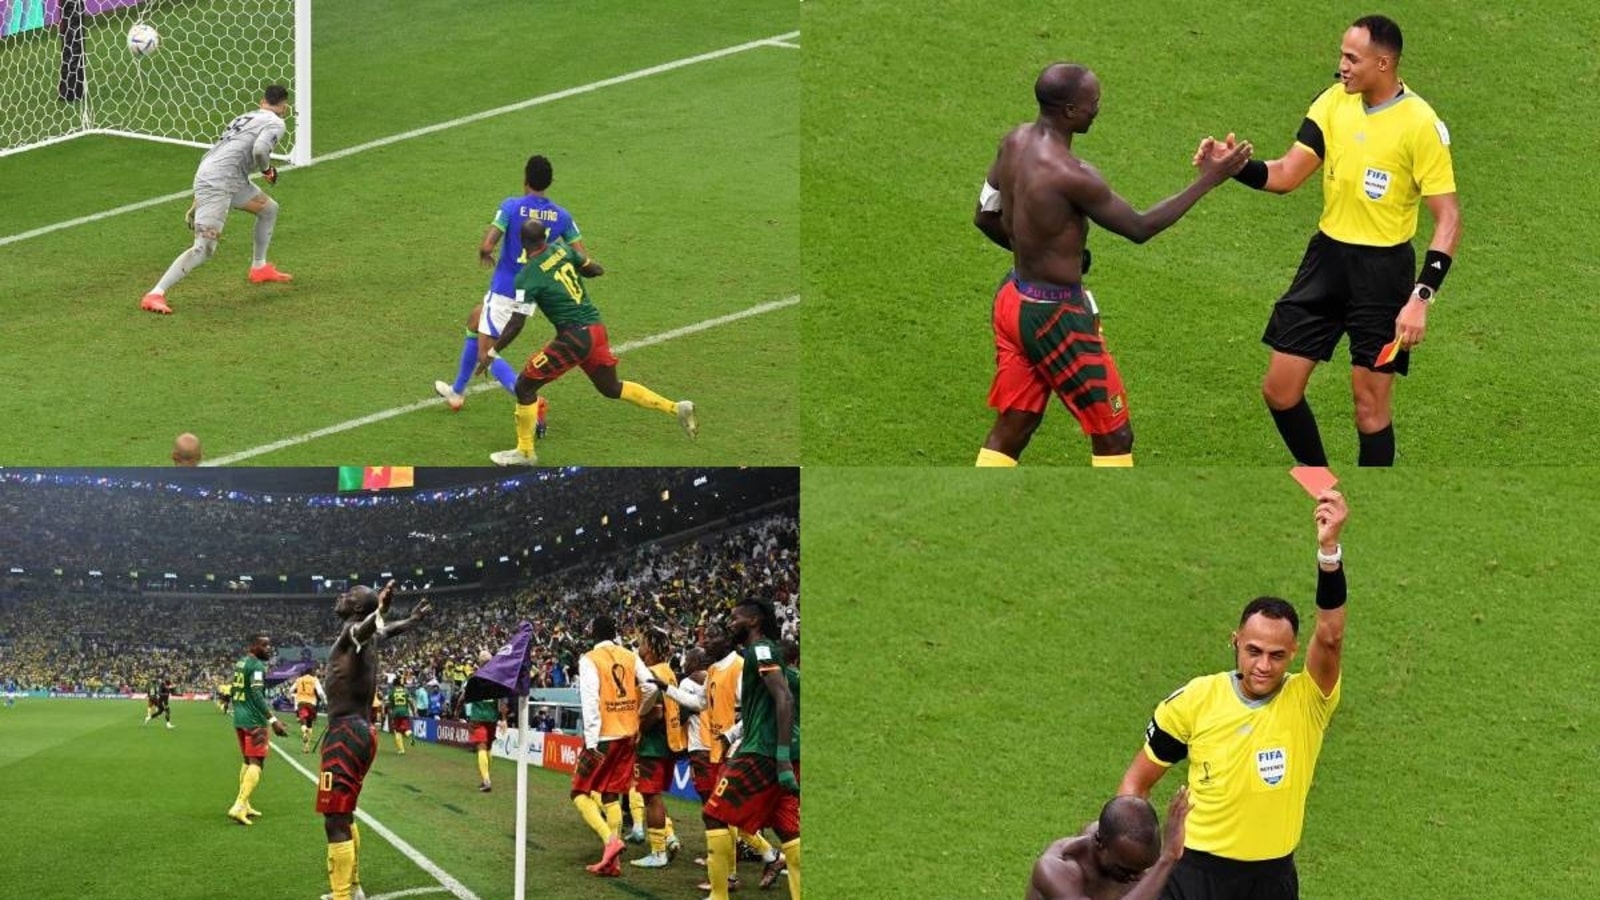 Watch: Referee’s act after showing red card to Cameron’s historic goal-scorer Aboubakar vs Brazil, goes viral